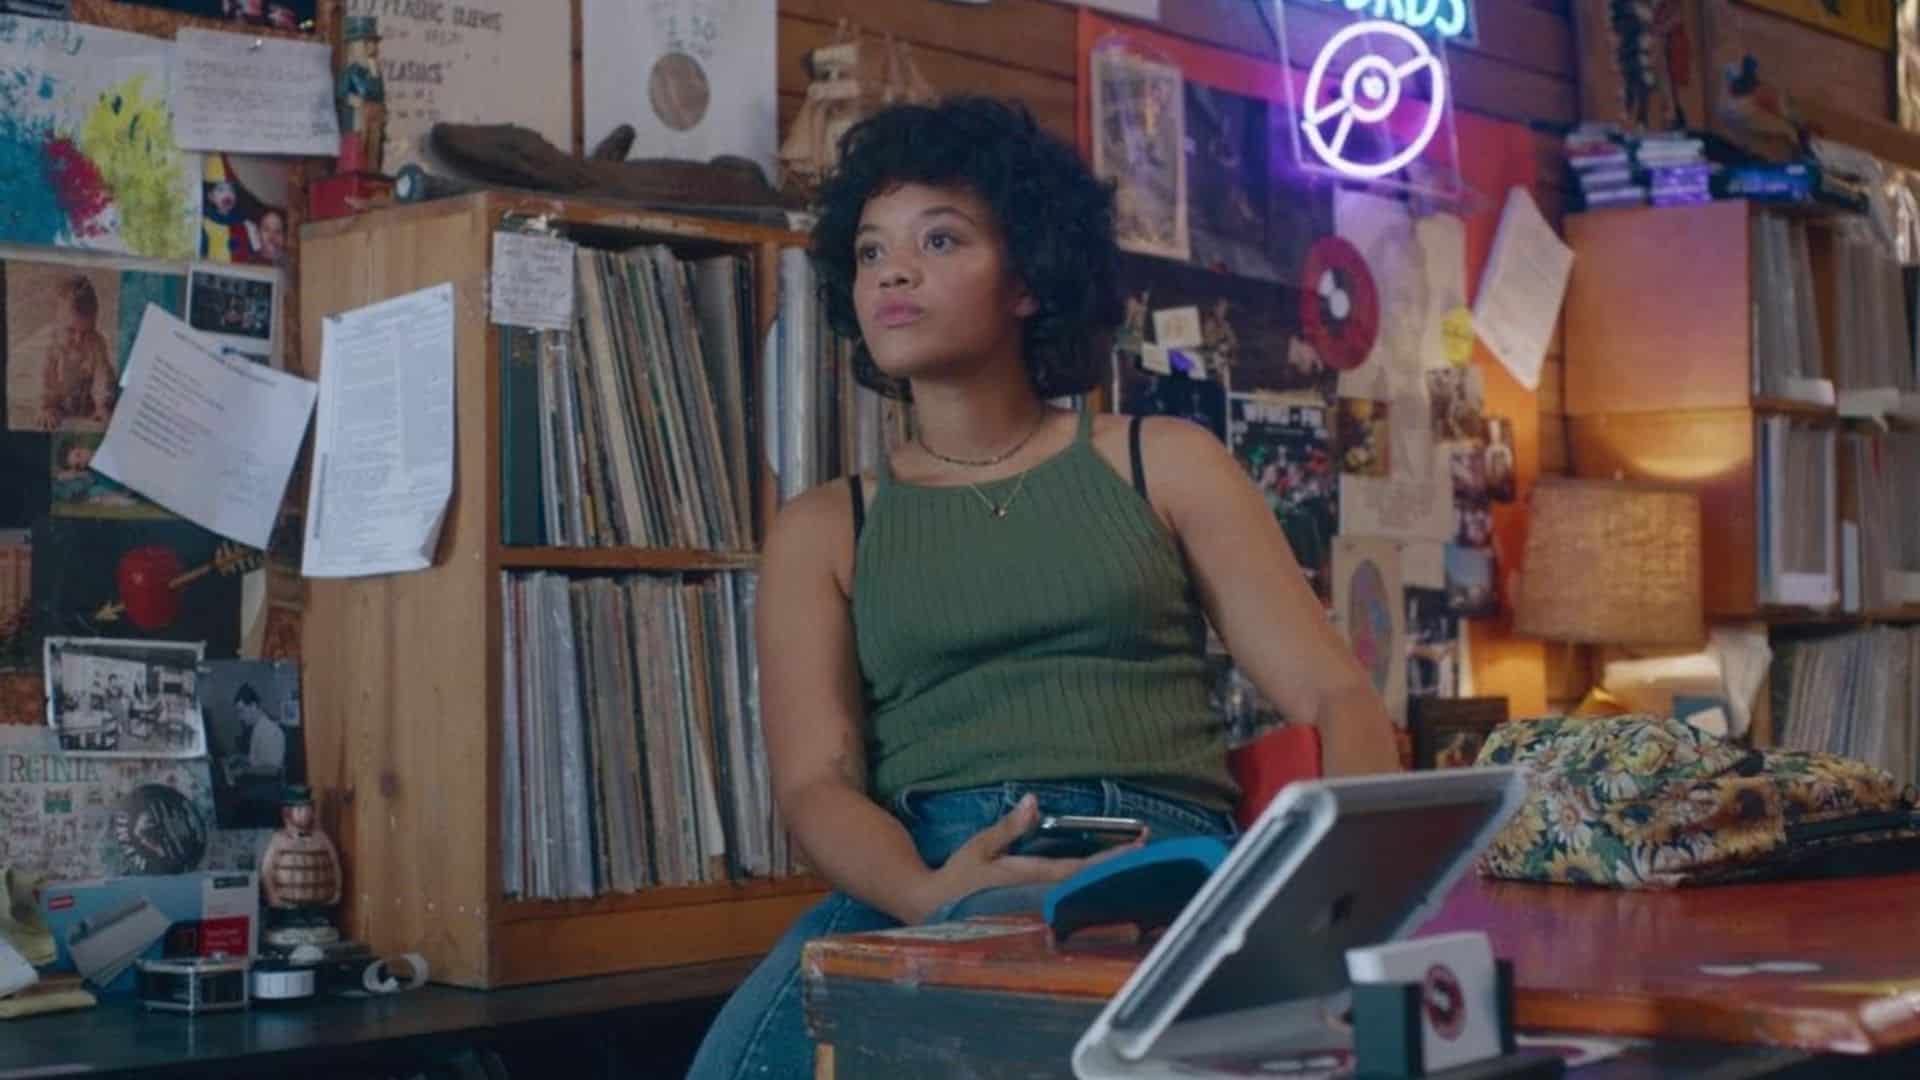 A woman working the counter of a record store in this image from Burn Later Productions.